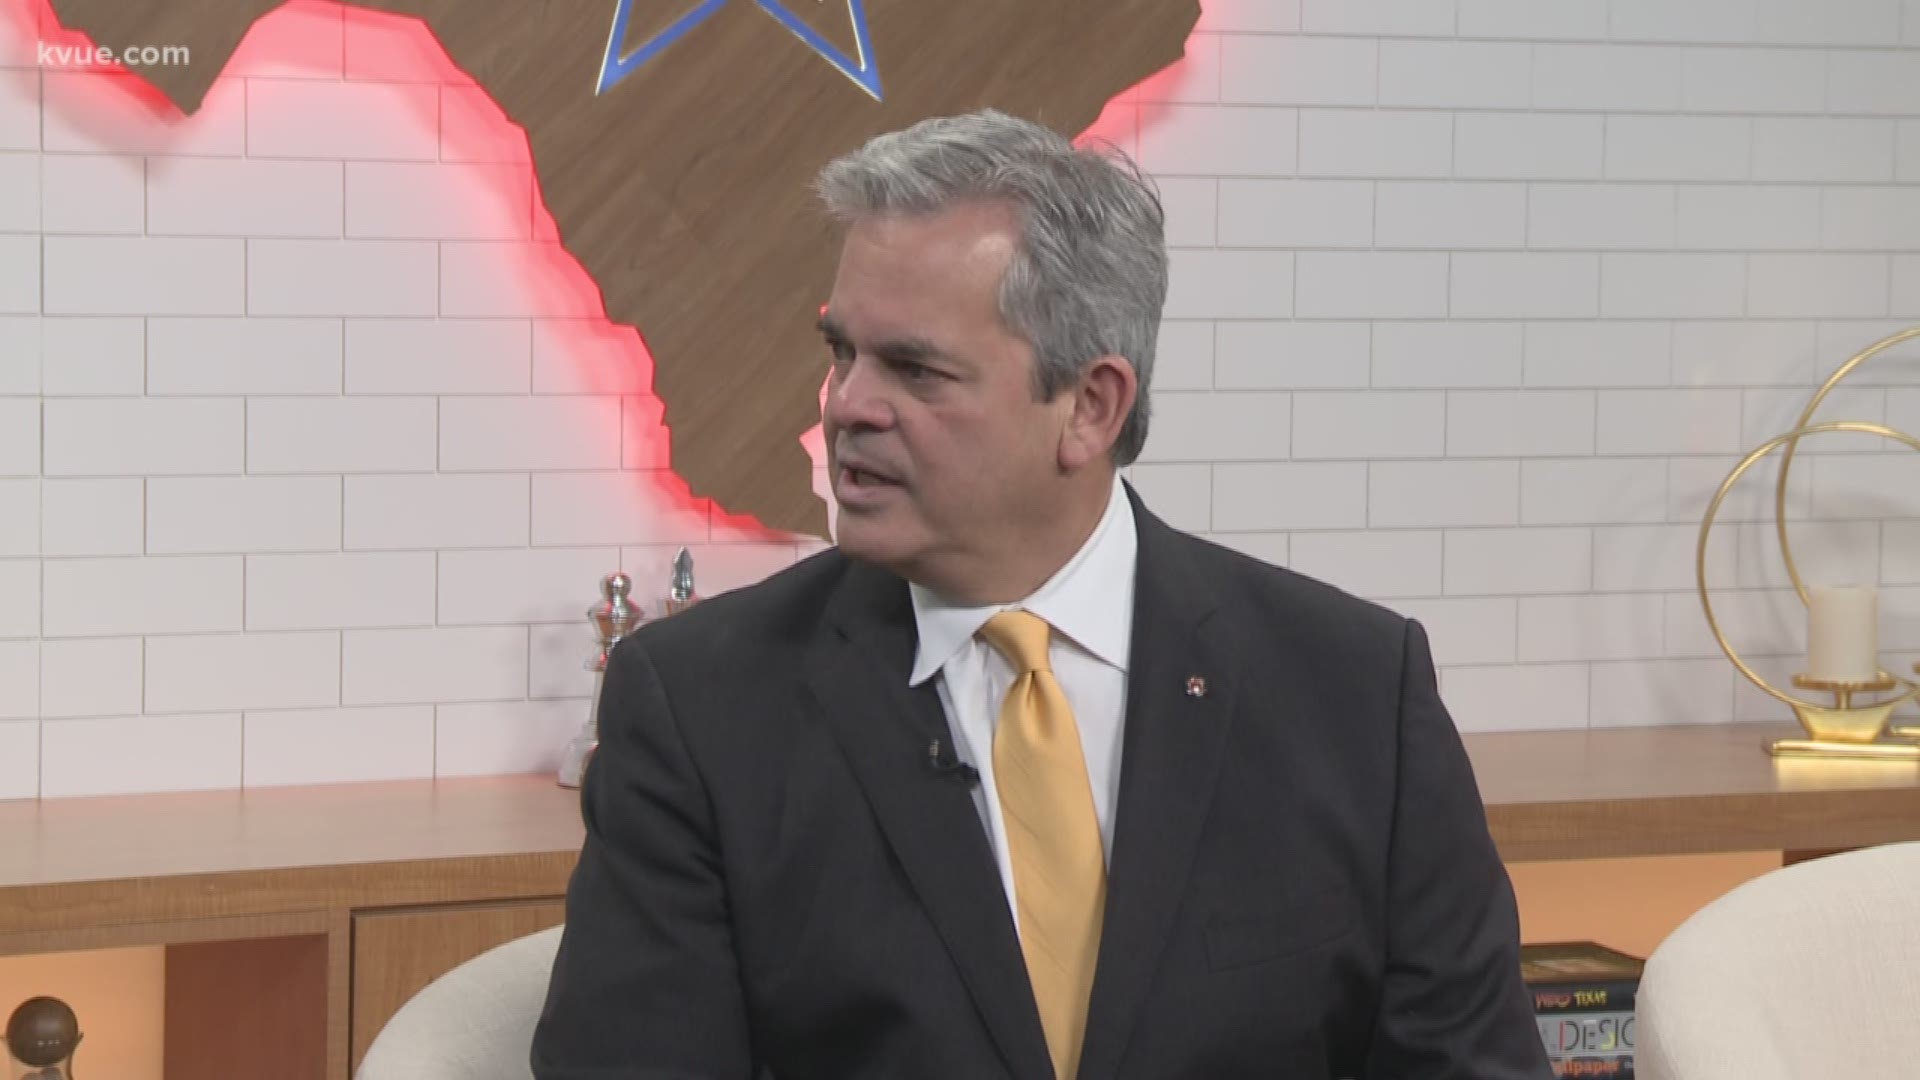 Austin Mayor Steve Adler came by KVUE Monday to talk about an announcement coming from MLS and a $2.5 million donation from the "American Cities Climate Challenge."